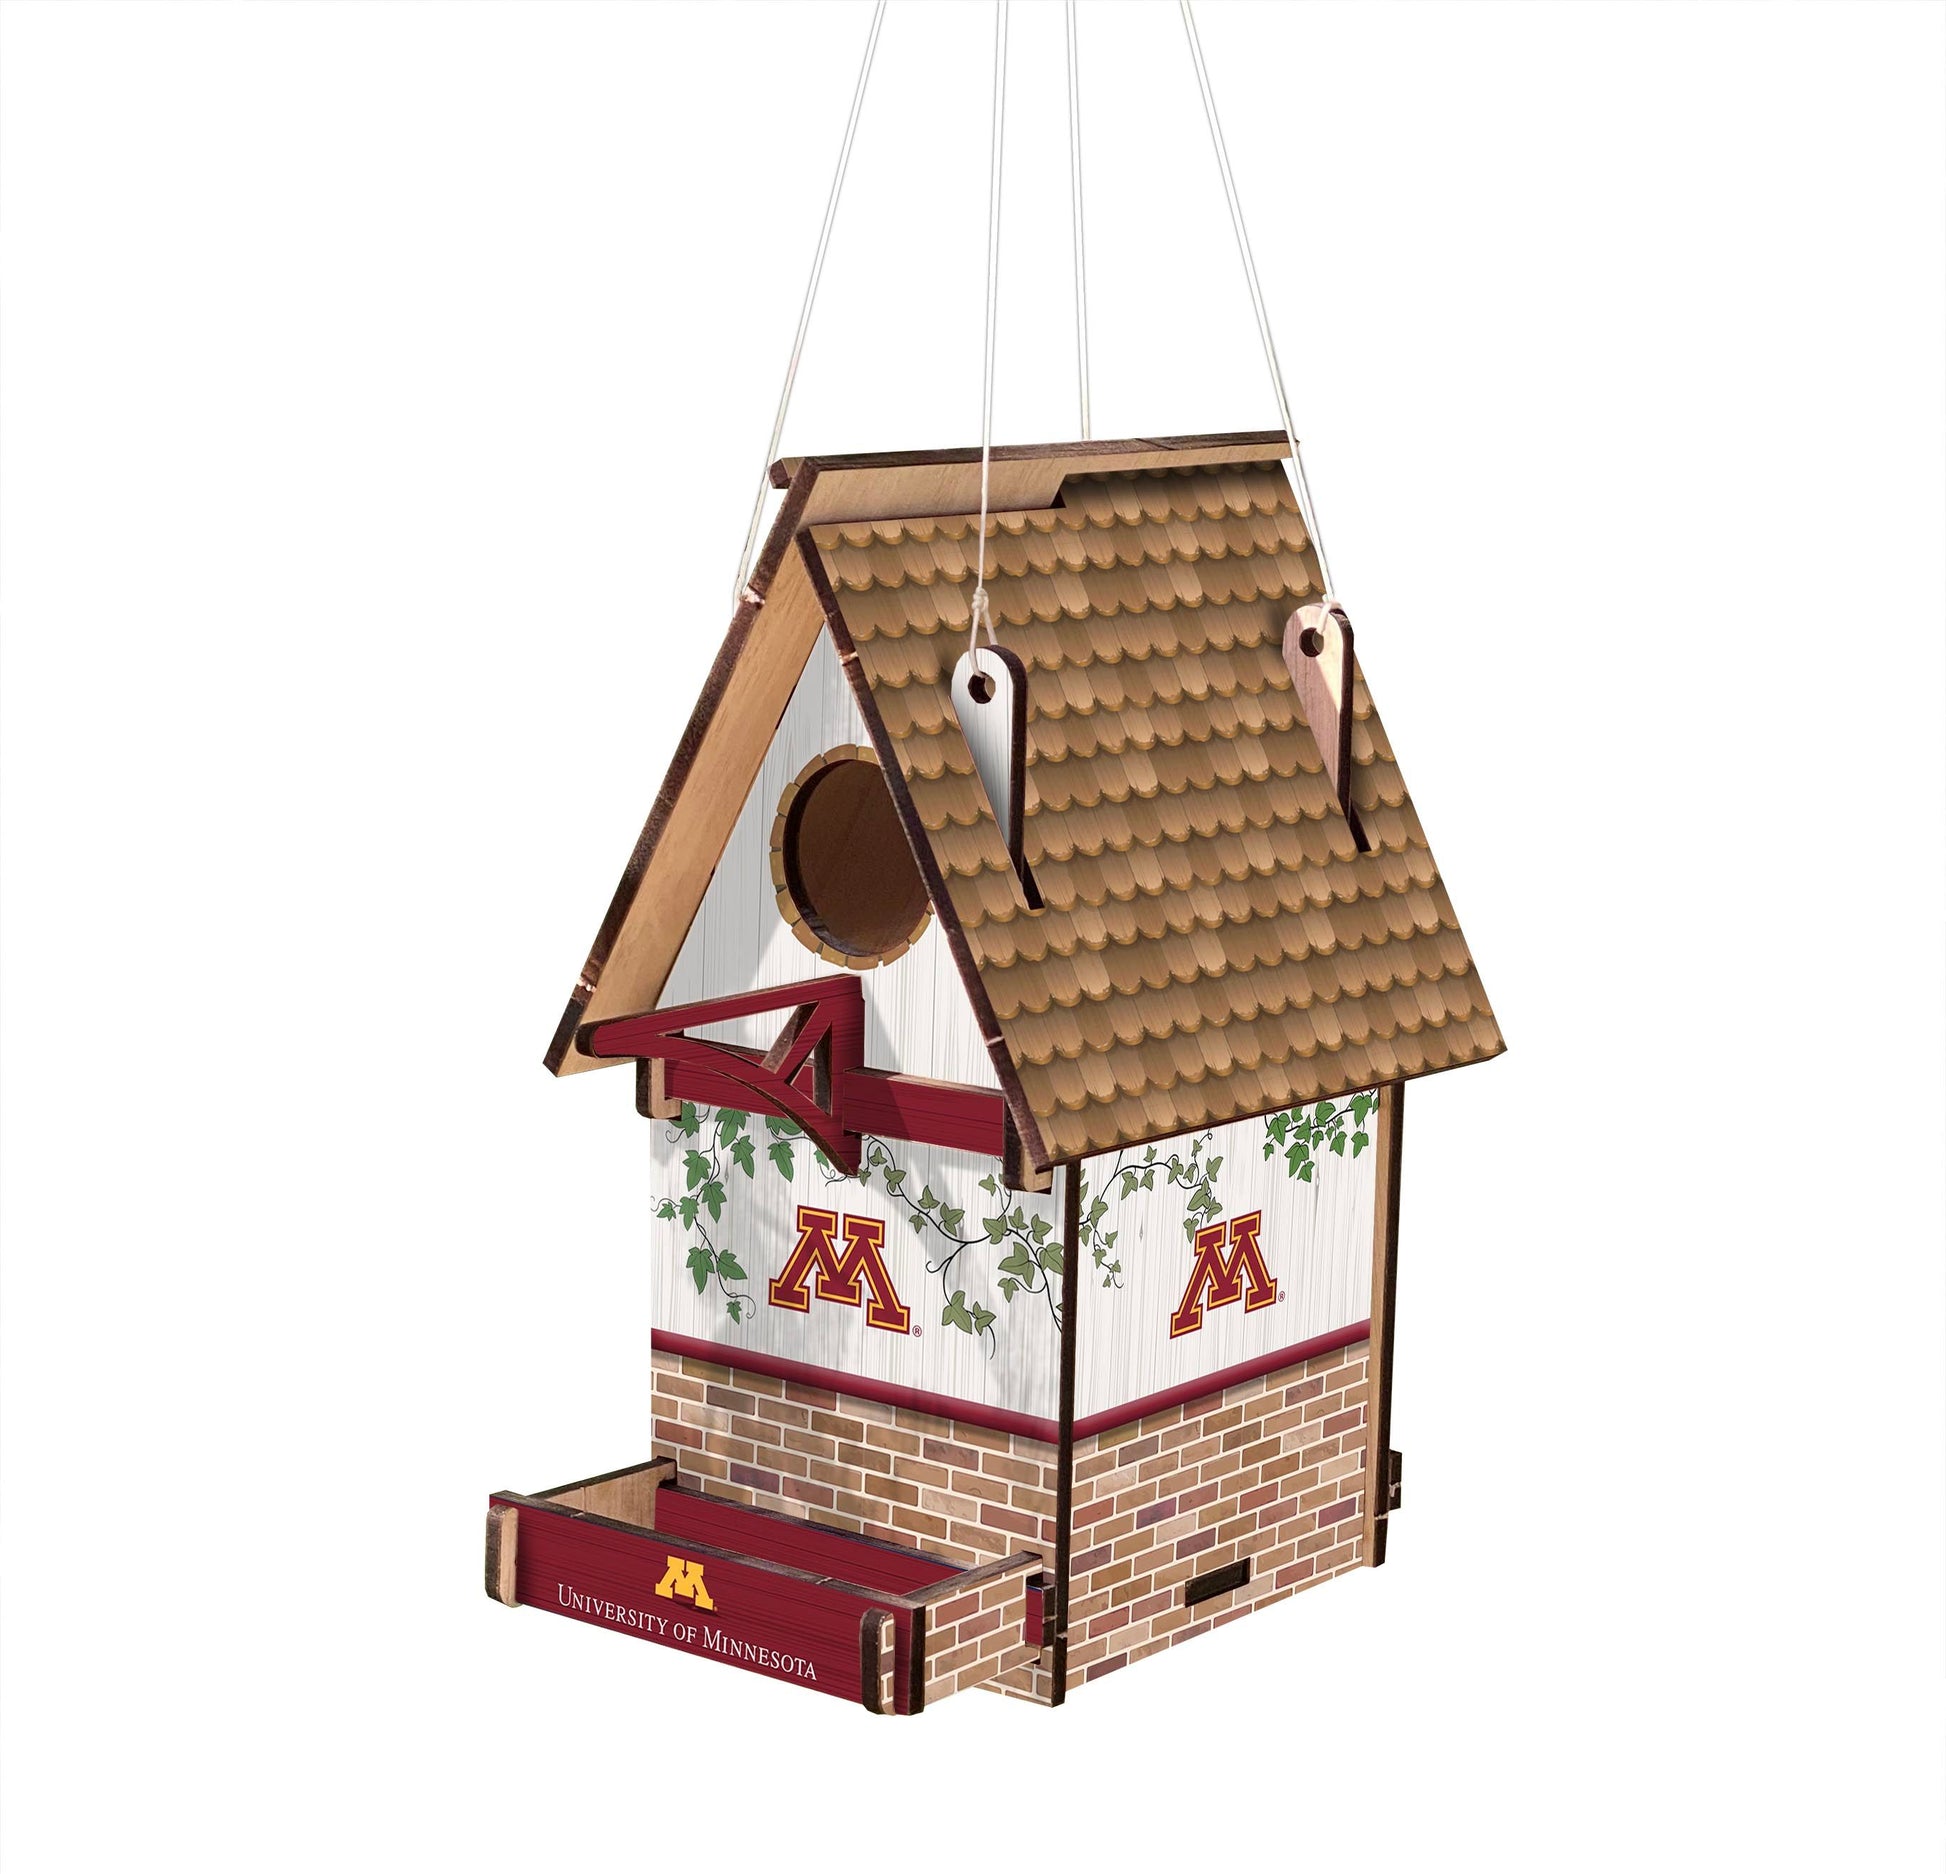 Show your team spirit while enjoying the birds in your backyard with the Minnesota Golden Gophers Wood Birdhouse. This officially licensed birdhouse is made from MDF and cut and printed with the team's graphics and colors.